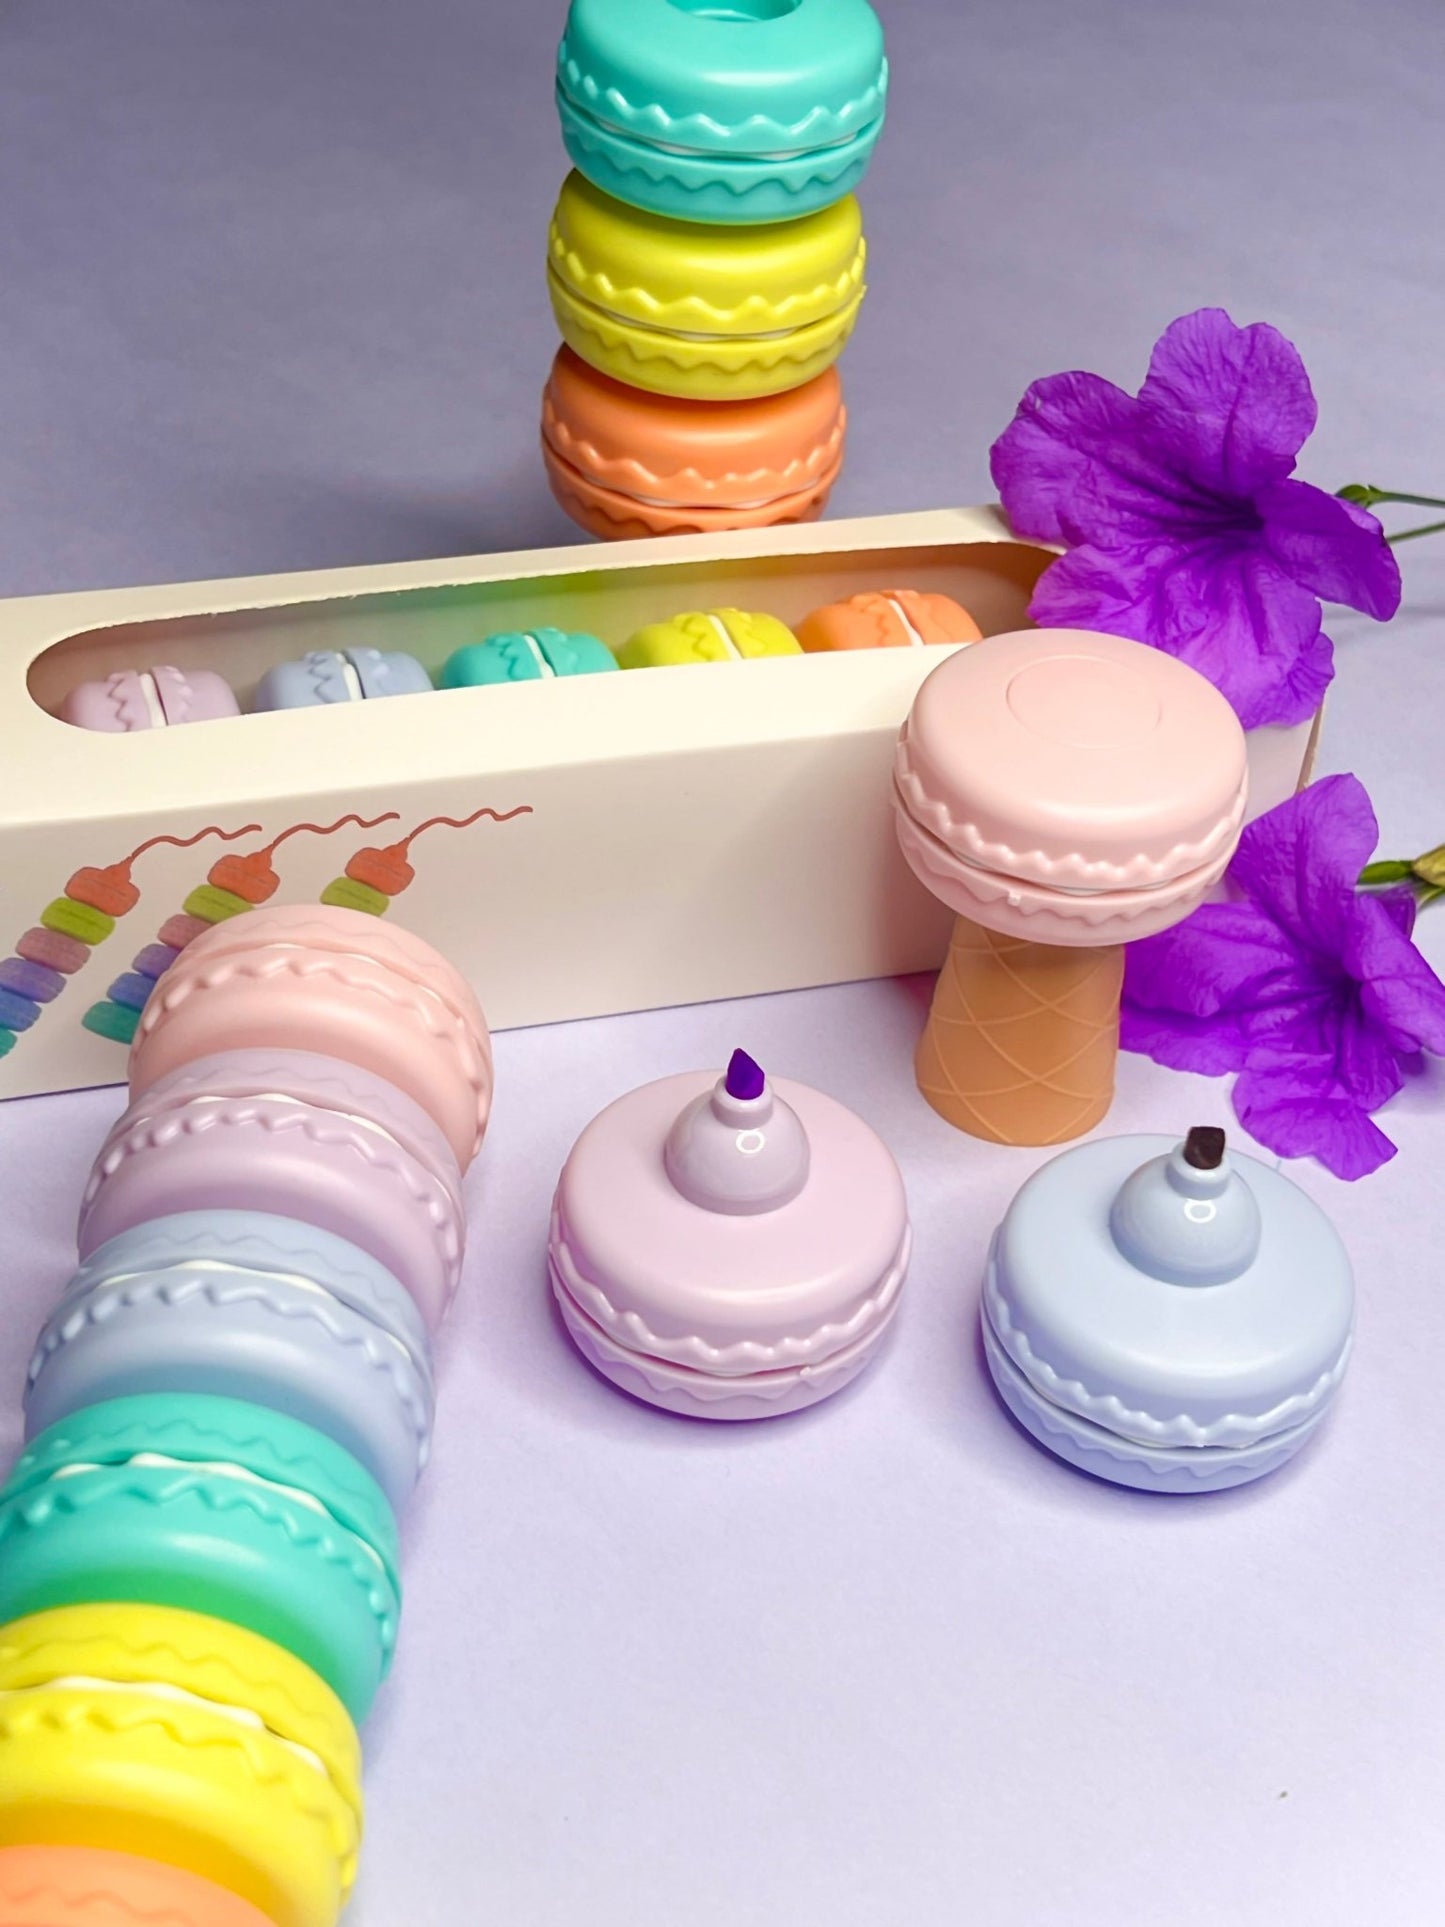 6 Macaron Mini Highlighter Pens Marker Pens Different Color to Highlight Text.